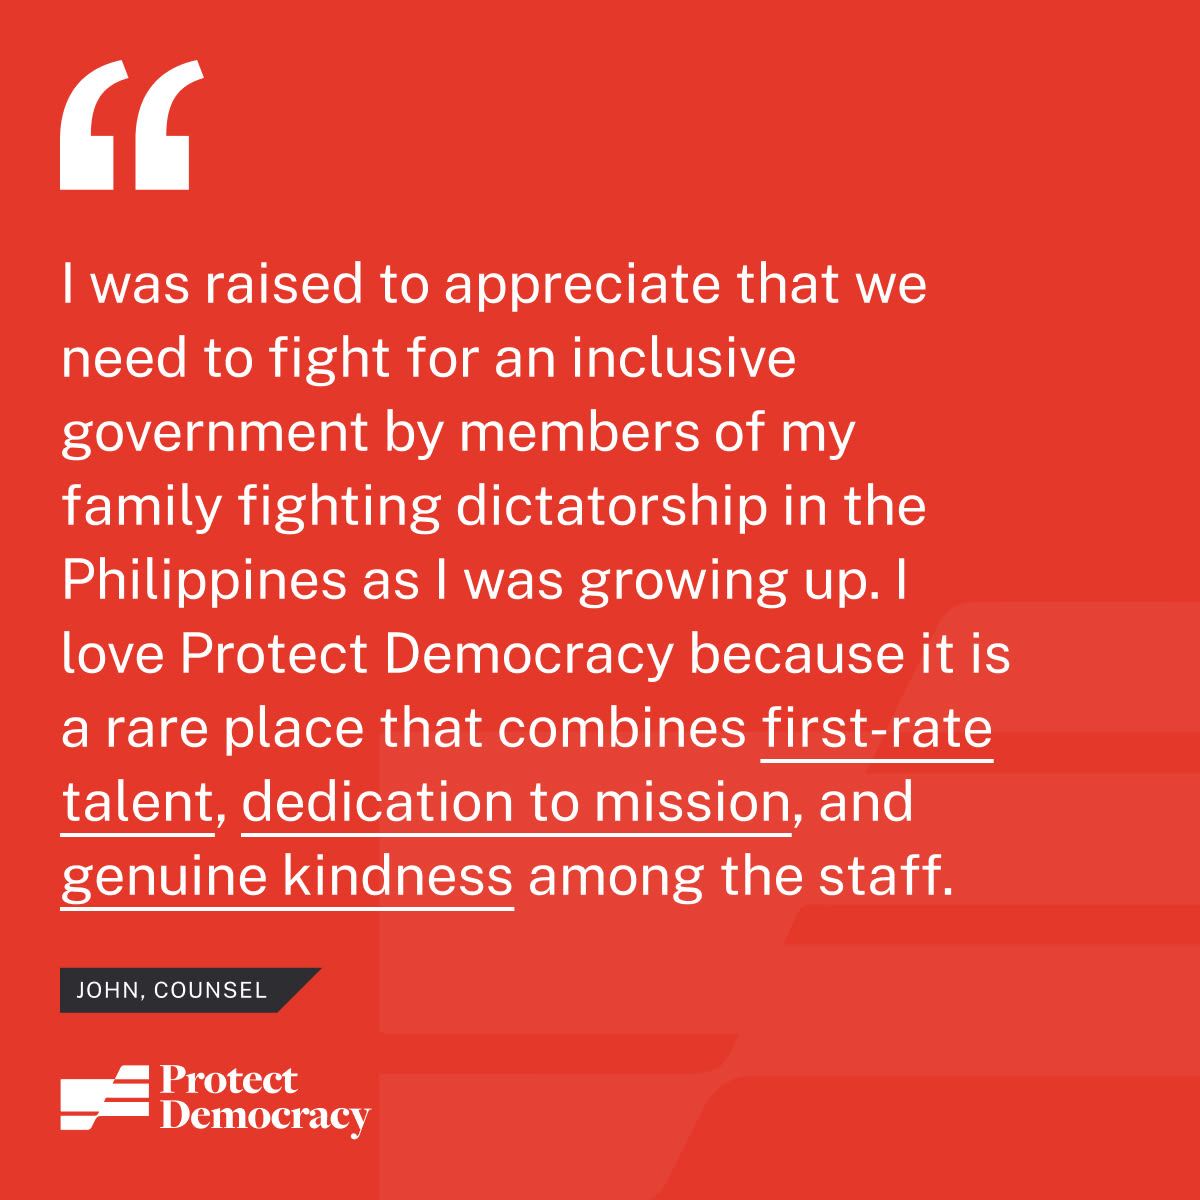 “I joined Protect Democracy because of the urgency of our mission. Members of my family fought the Marcos dictatorship in the Philippines in the 70s and 80s, and I was raised to appreciate that we need to fight for an inclusive government. I love working at Protect Democracy because it is a rare place that combines first-rate professional talent, dedication to mission over personal gain, and genuine kindness and selflessness among the staff.” – John, Counsel